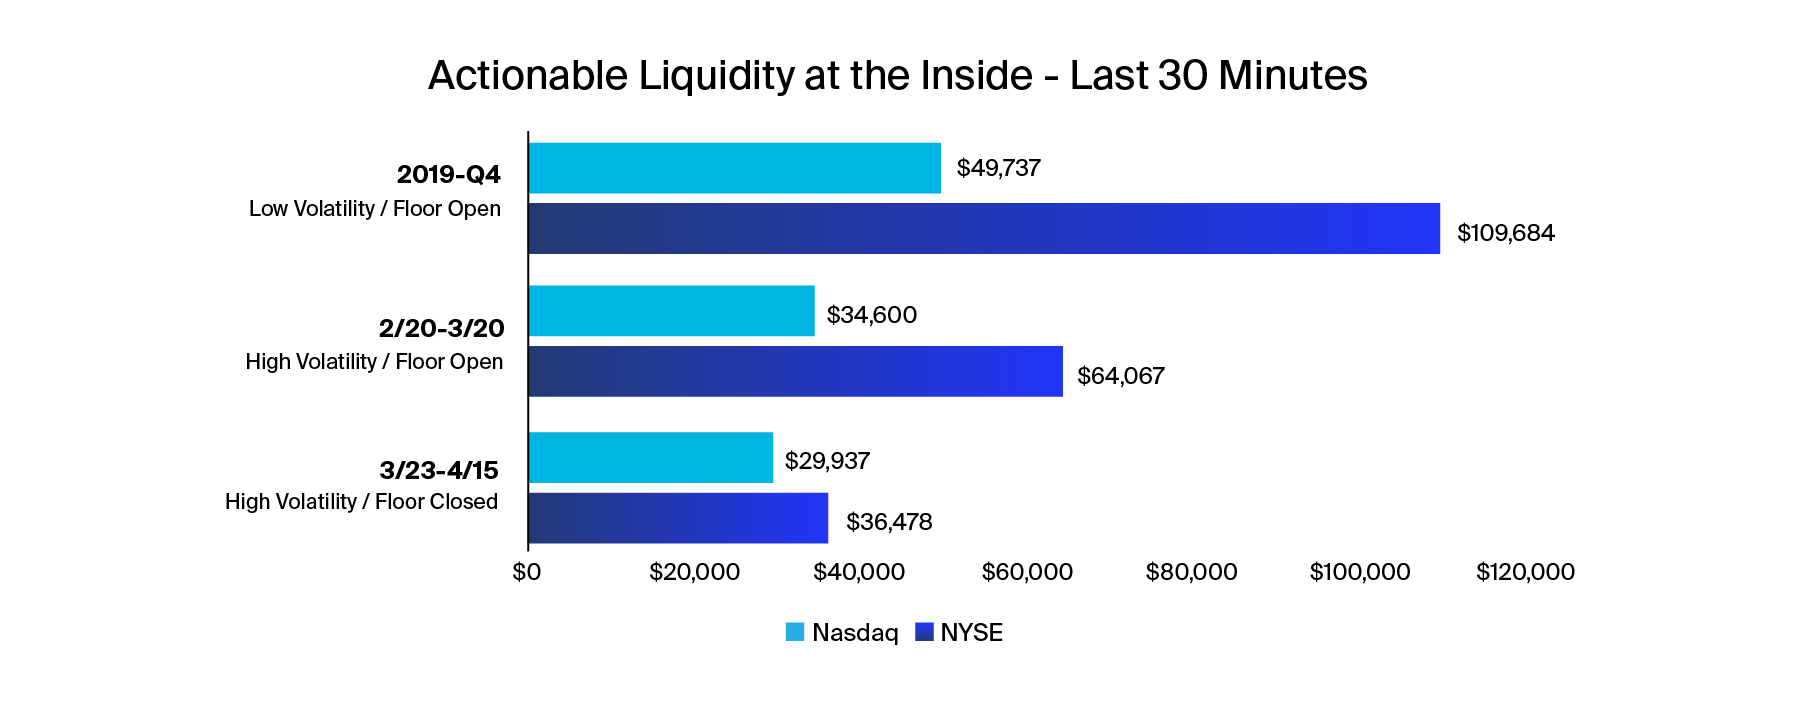 NYSE Stocks offer more late-day liquidity